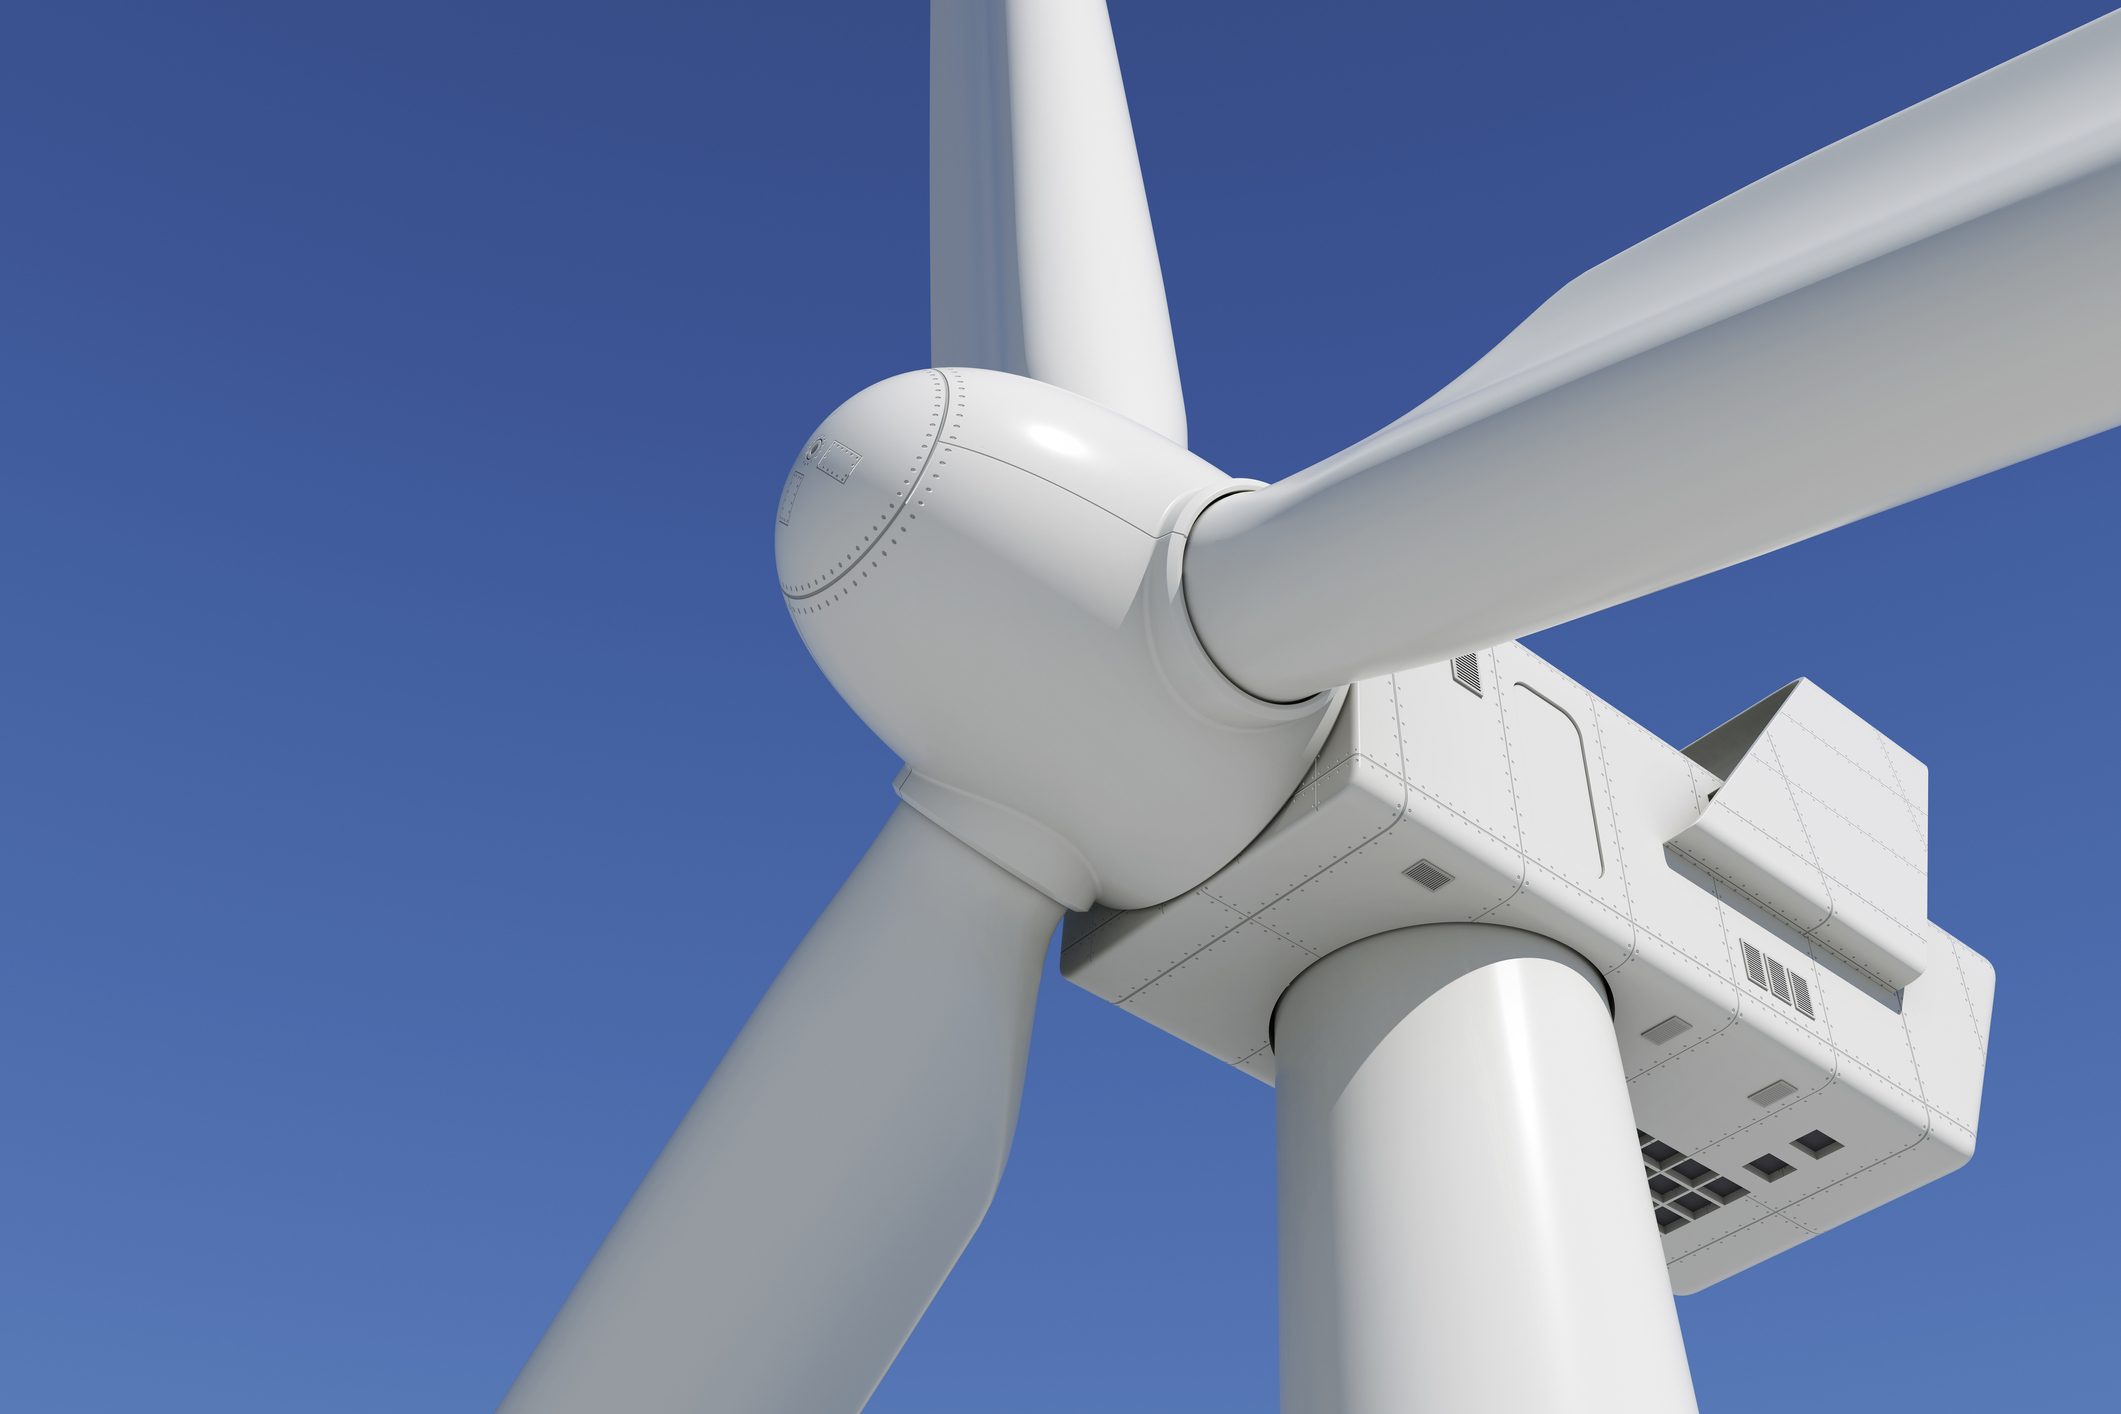 Wind power production in Brazil in the first half of April increased by  11.1% per year